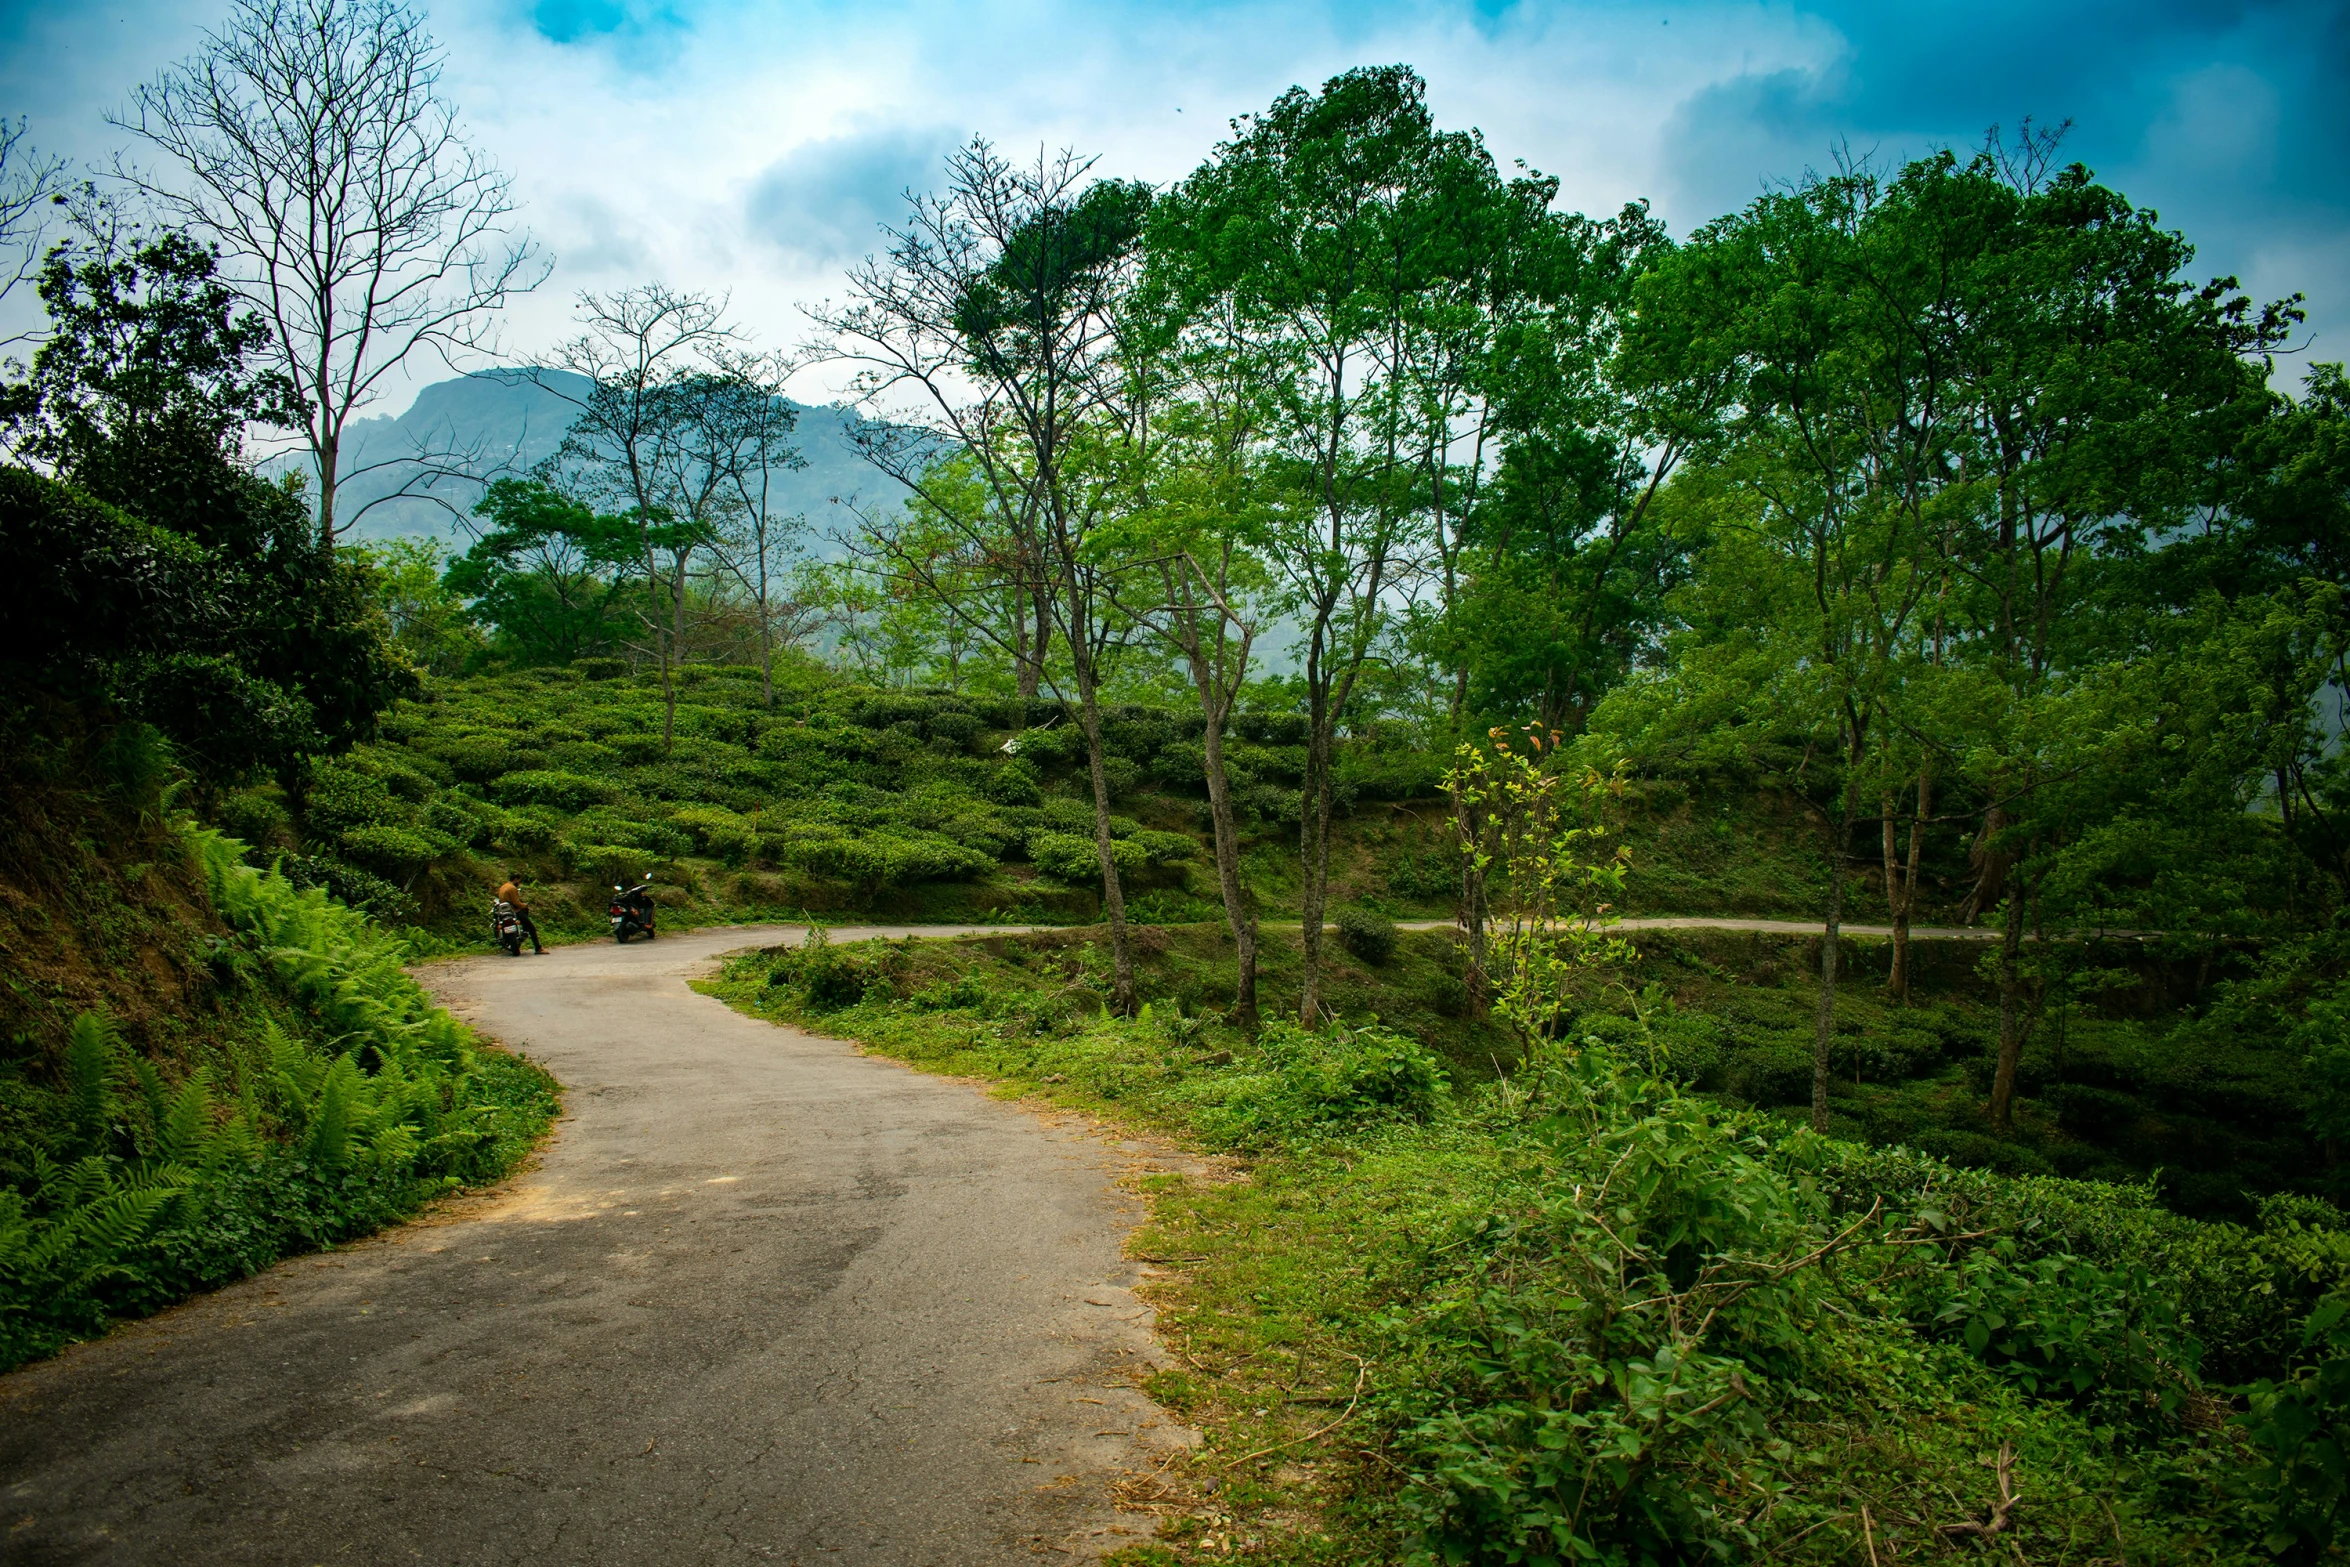 a winding road near trees and mountains in the distance